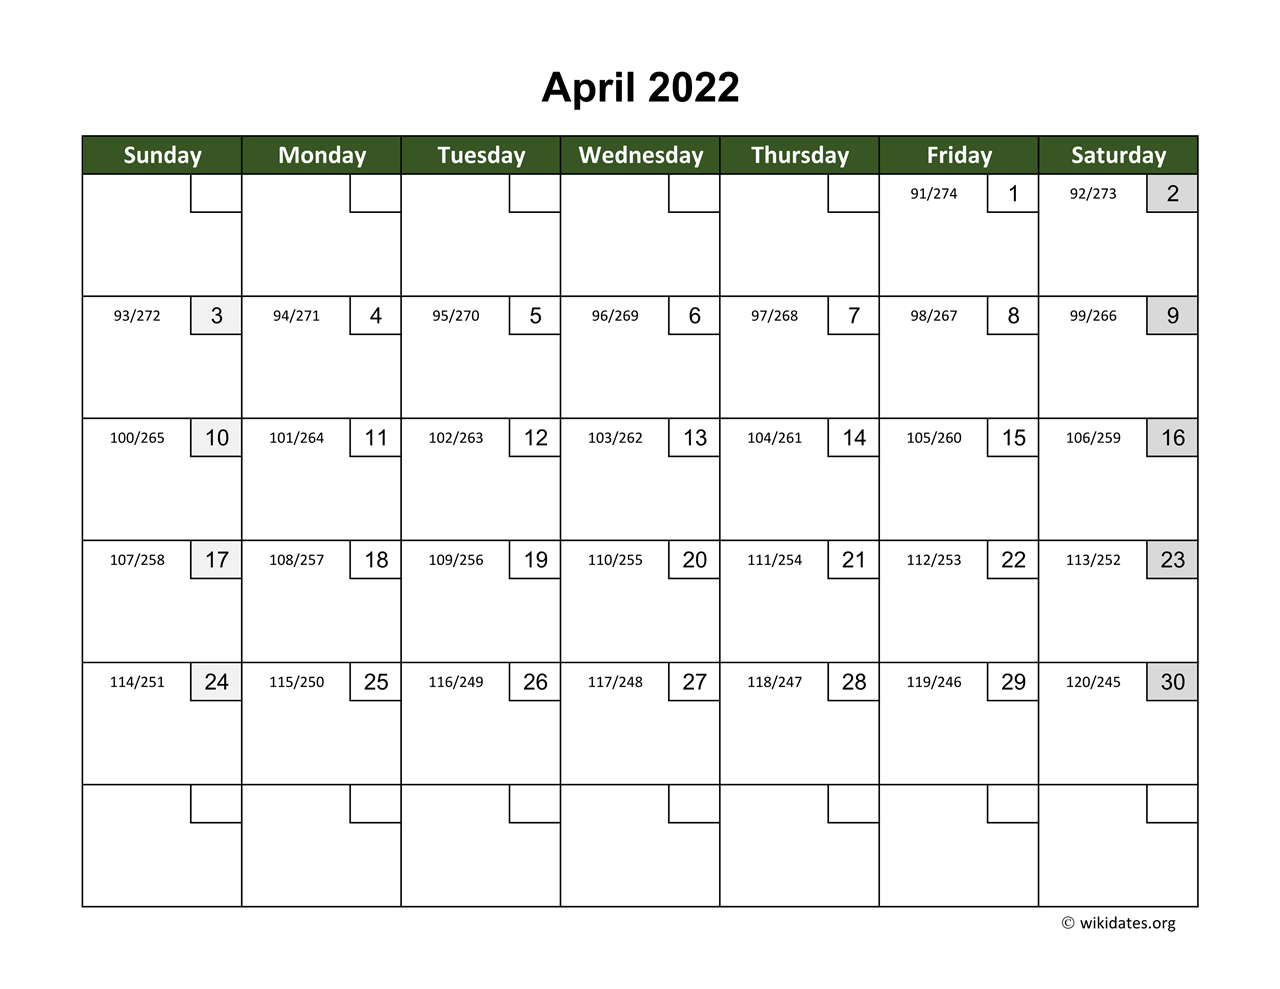 April 2022 Calendar With Day Numbers | Wikidates